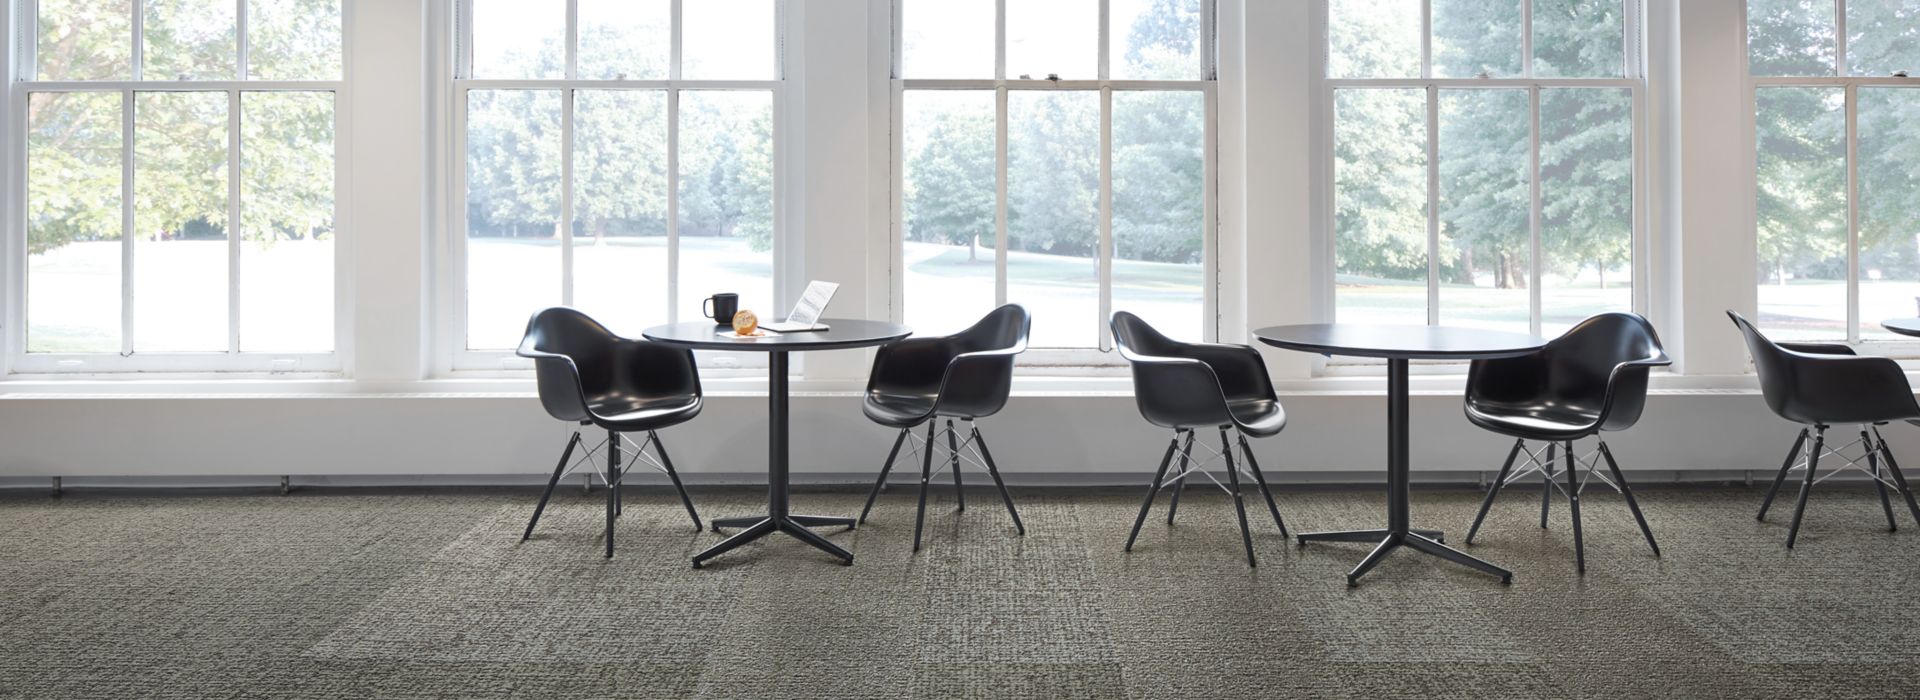 Interface Gridlock carpet tile with small tables against a wall of windows imagen número 1